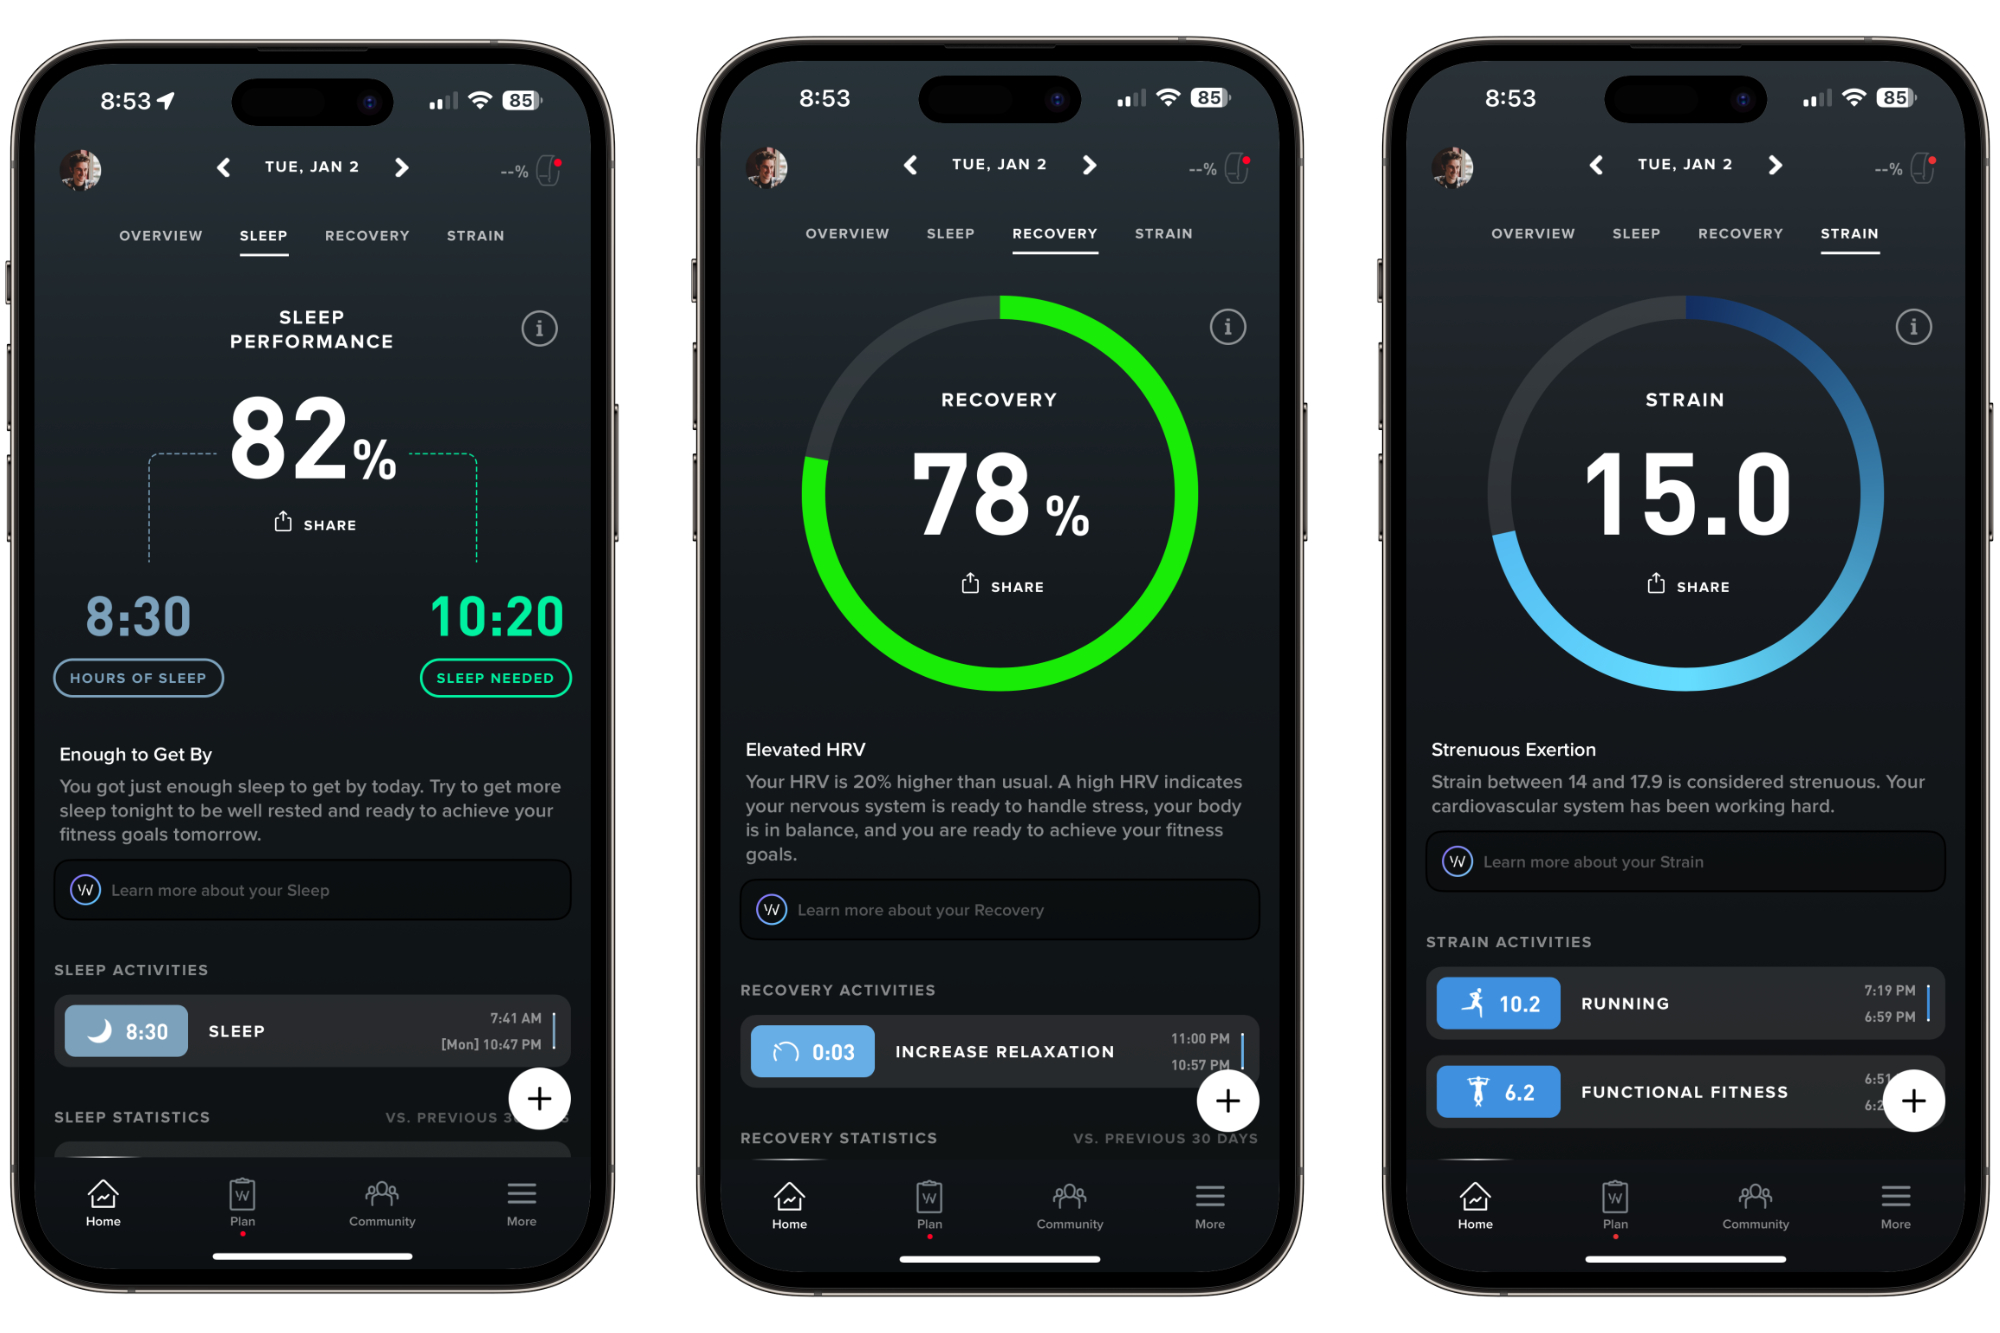 Screenshots of Sleep, Recovery, and Strain pages from the Whoop app.